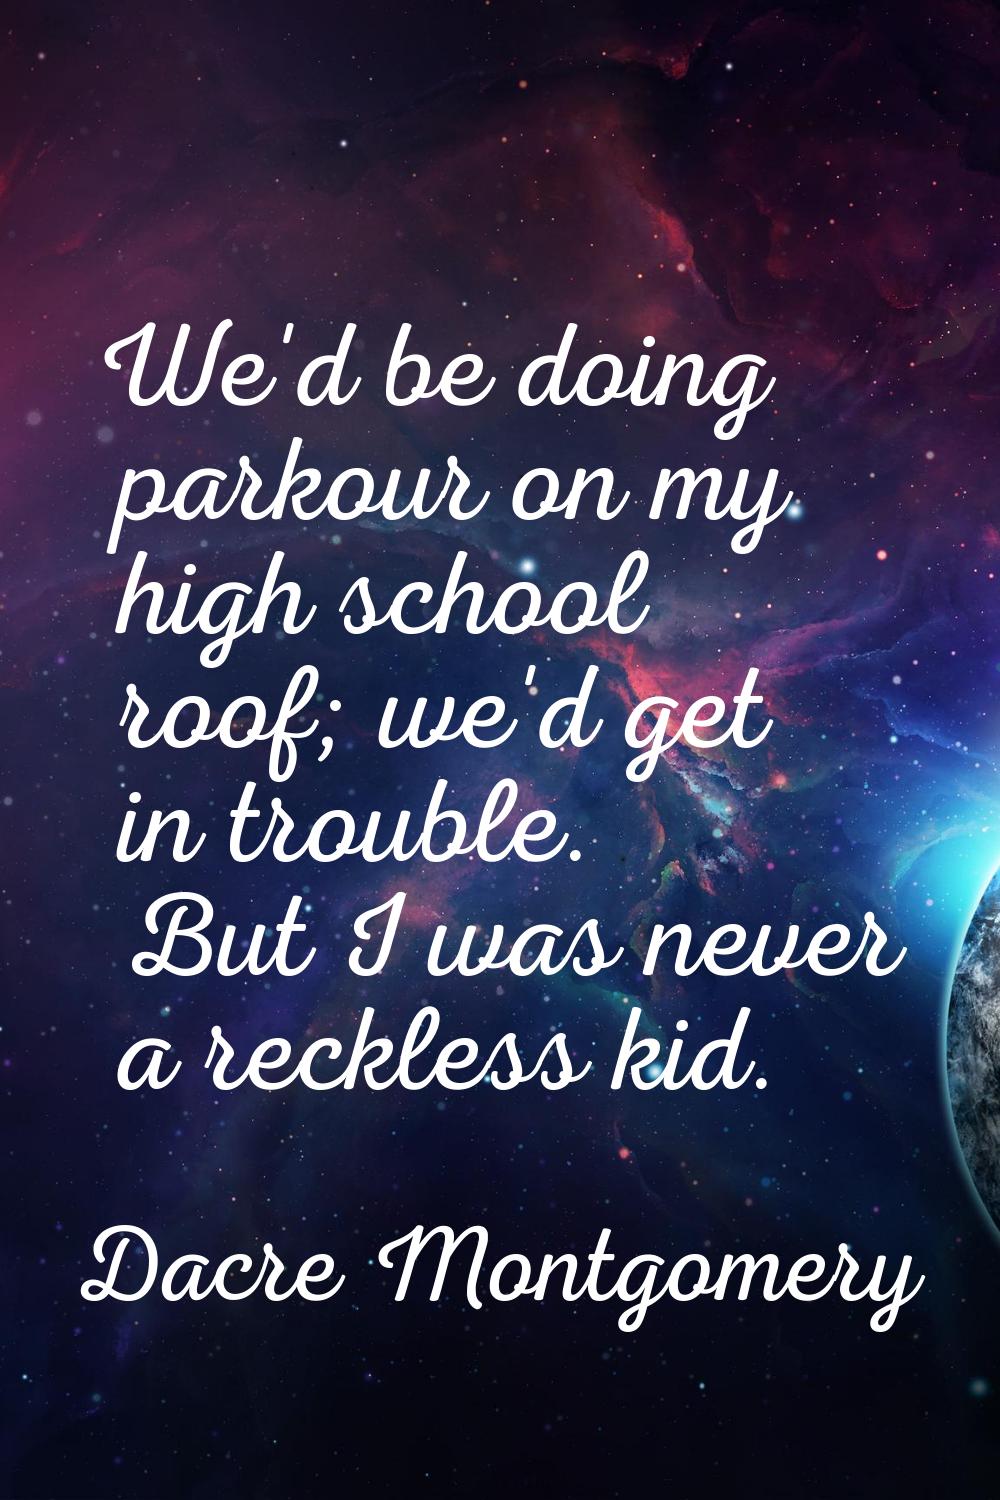 We'd be doing parkour on my high school roof; we'd get in trouble. But I was never a reckless kid.